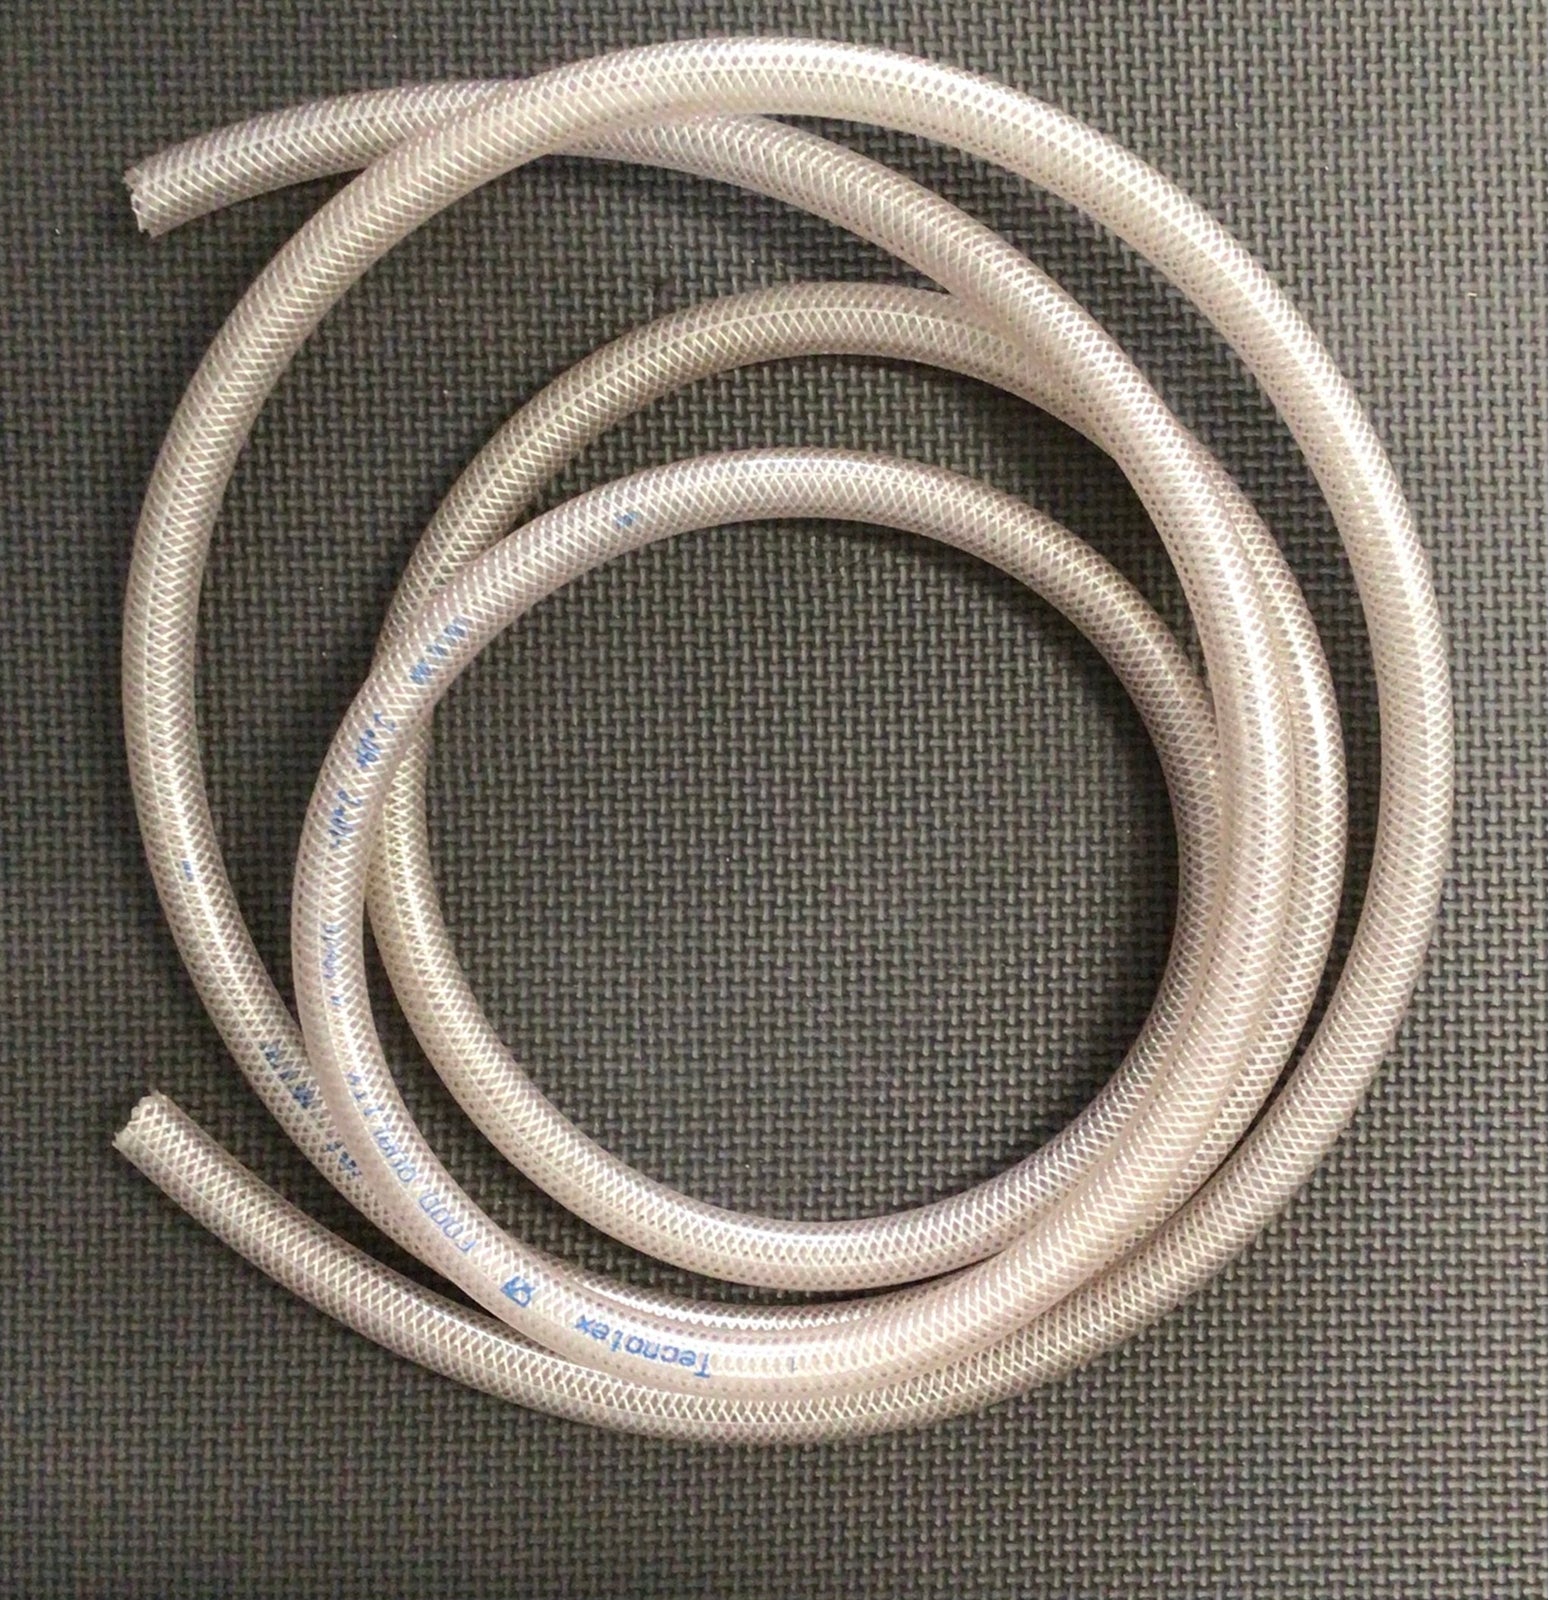 PN 2292365 - Water Hose for IMER Combi 250 / 1000 Saw -